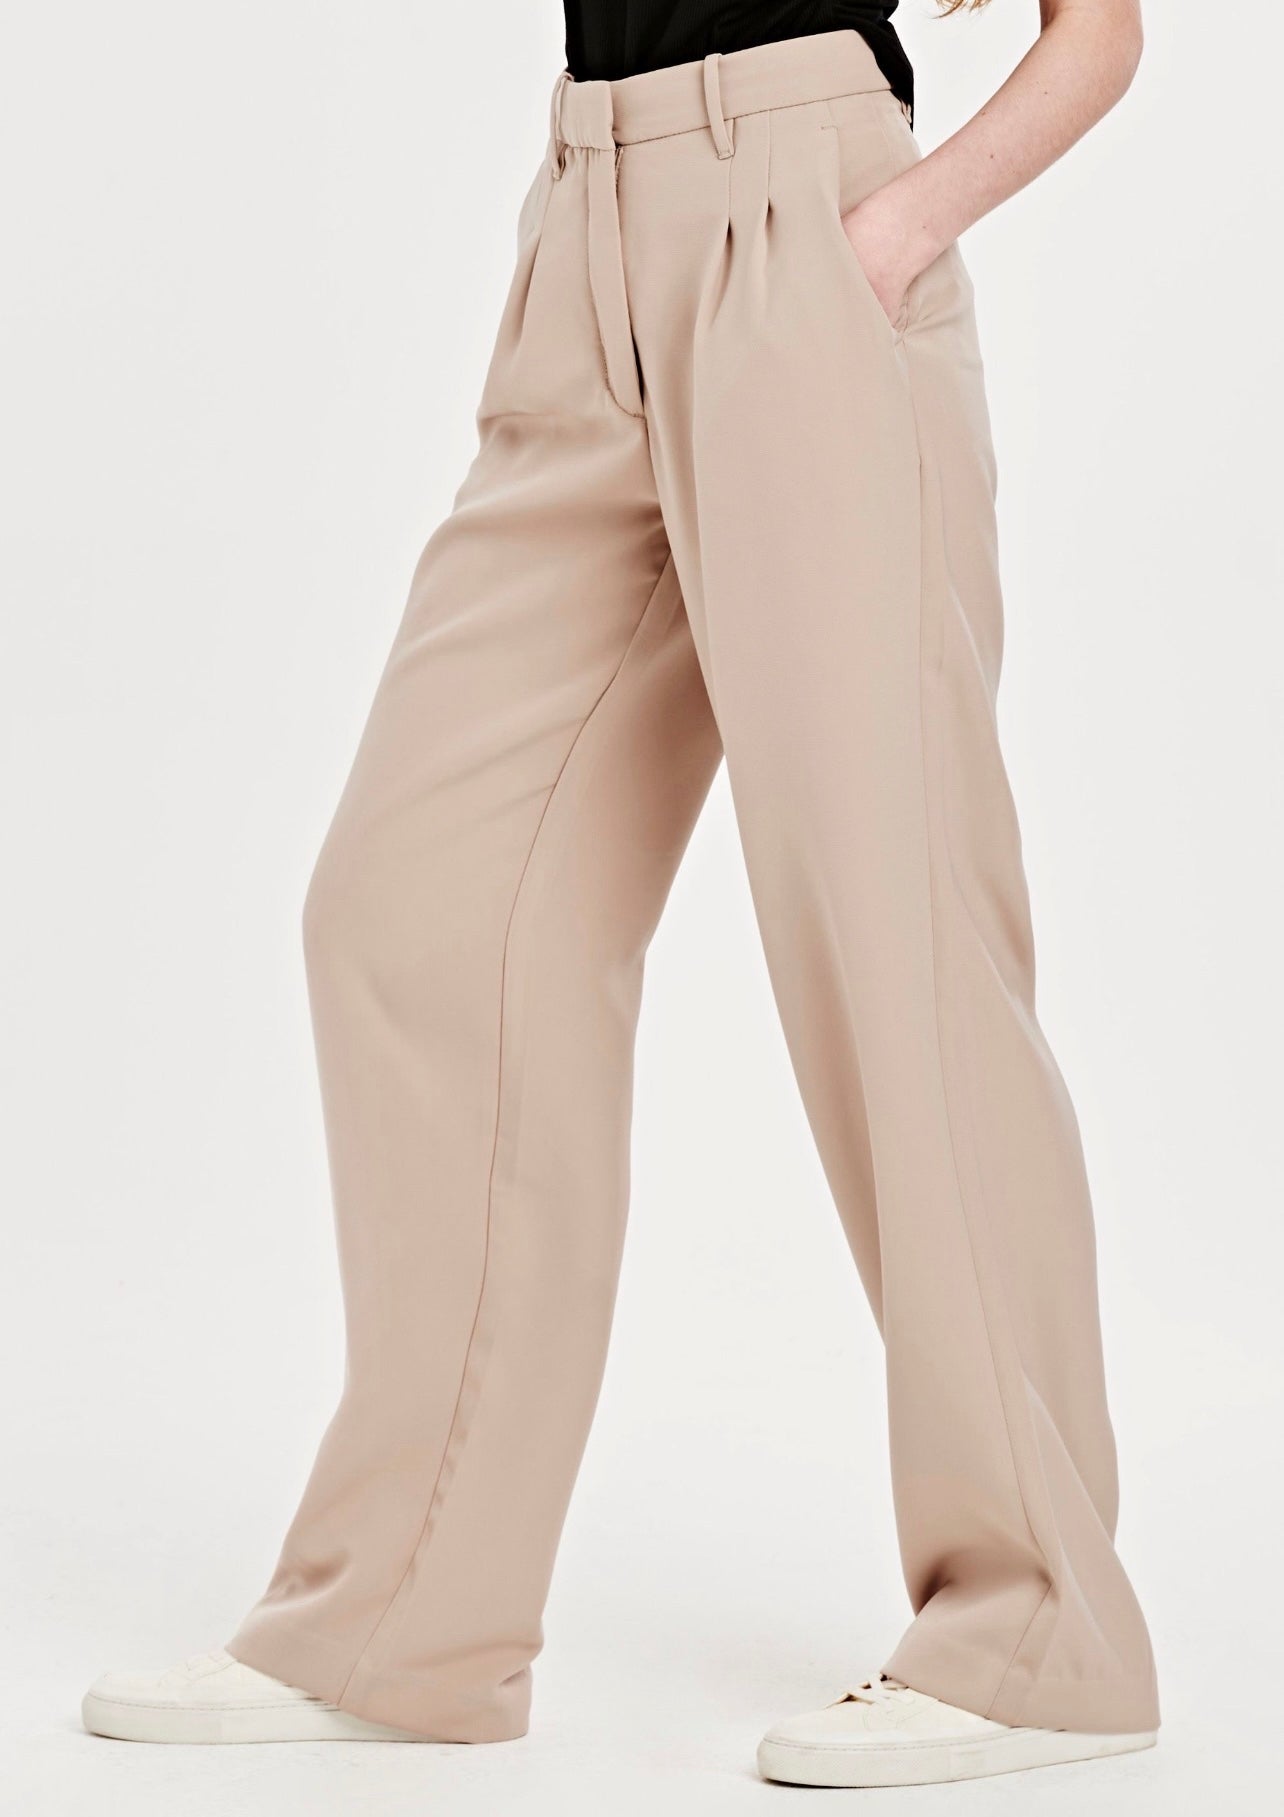 The Adelaide Pant